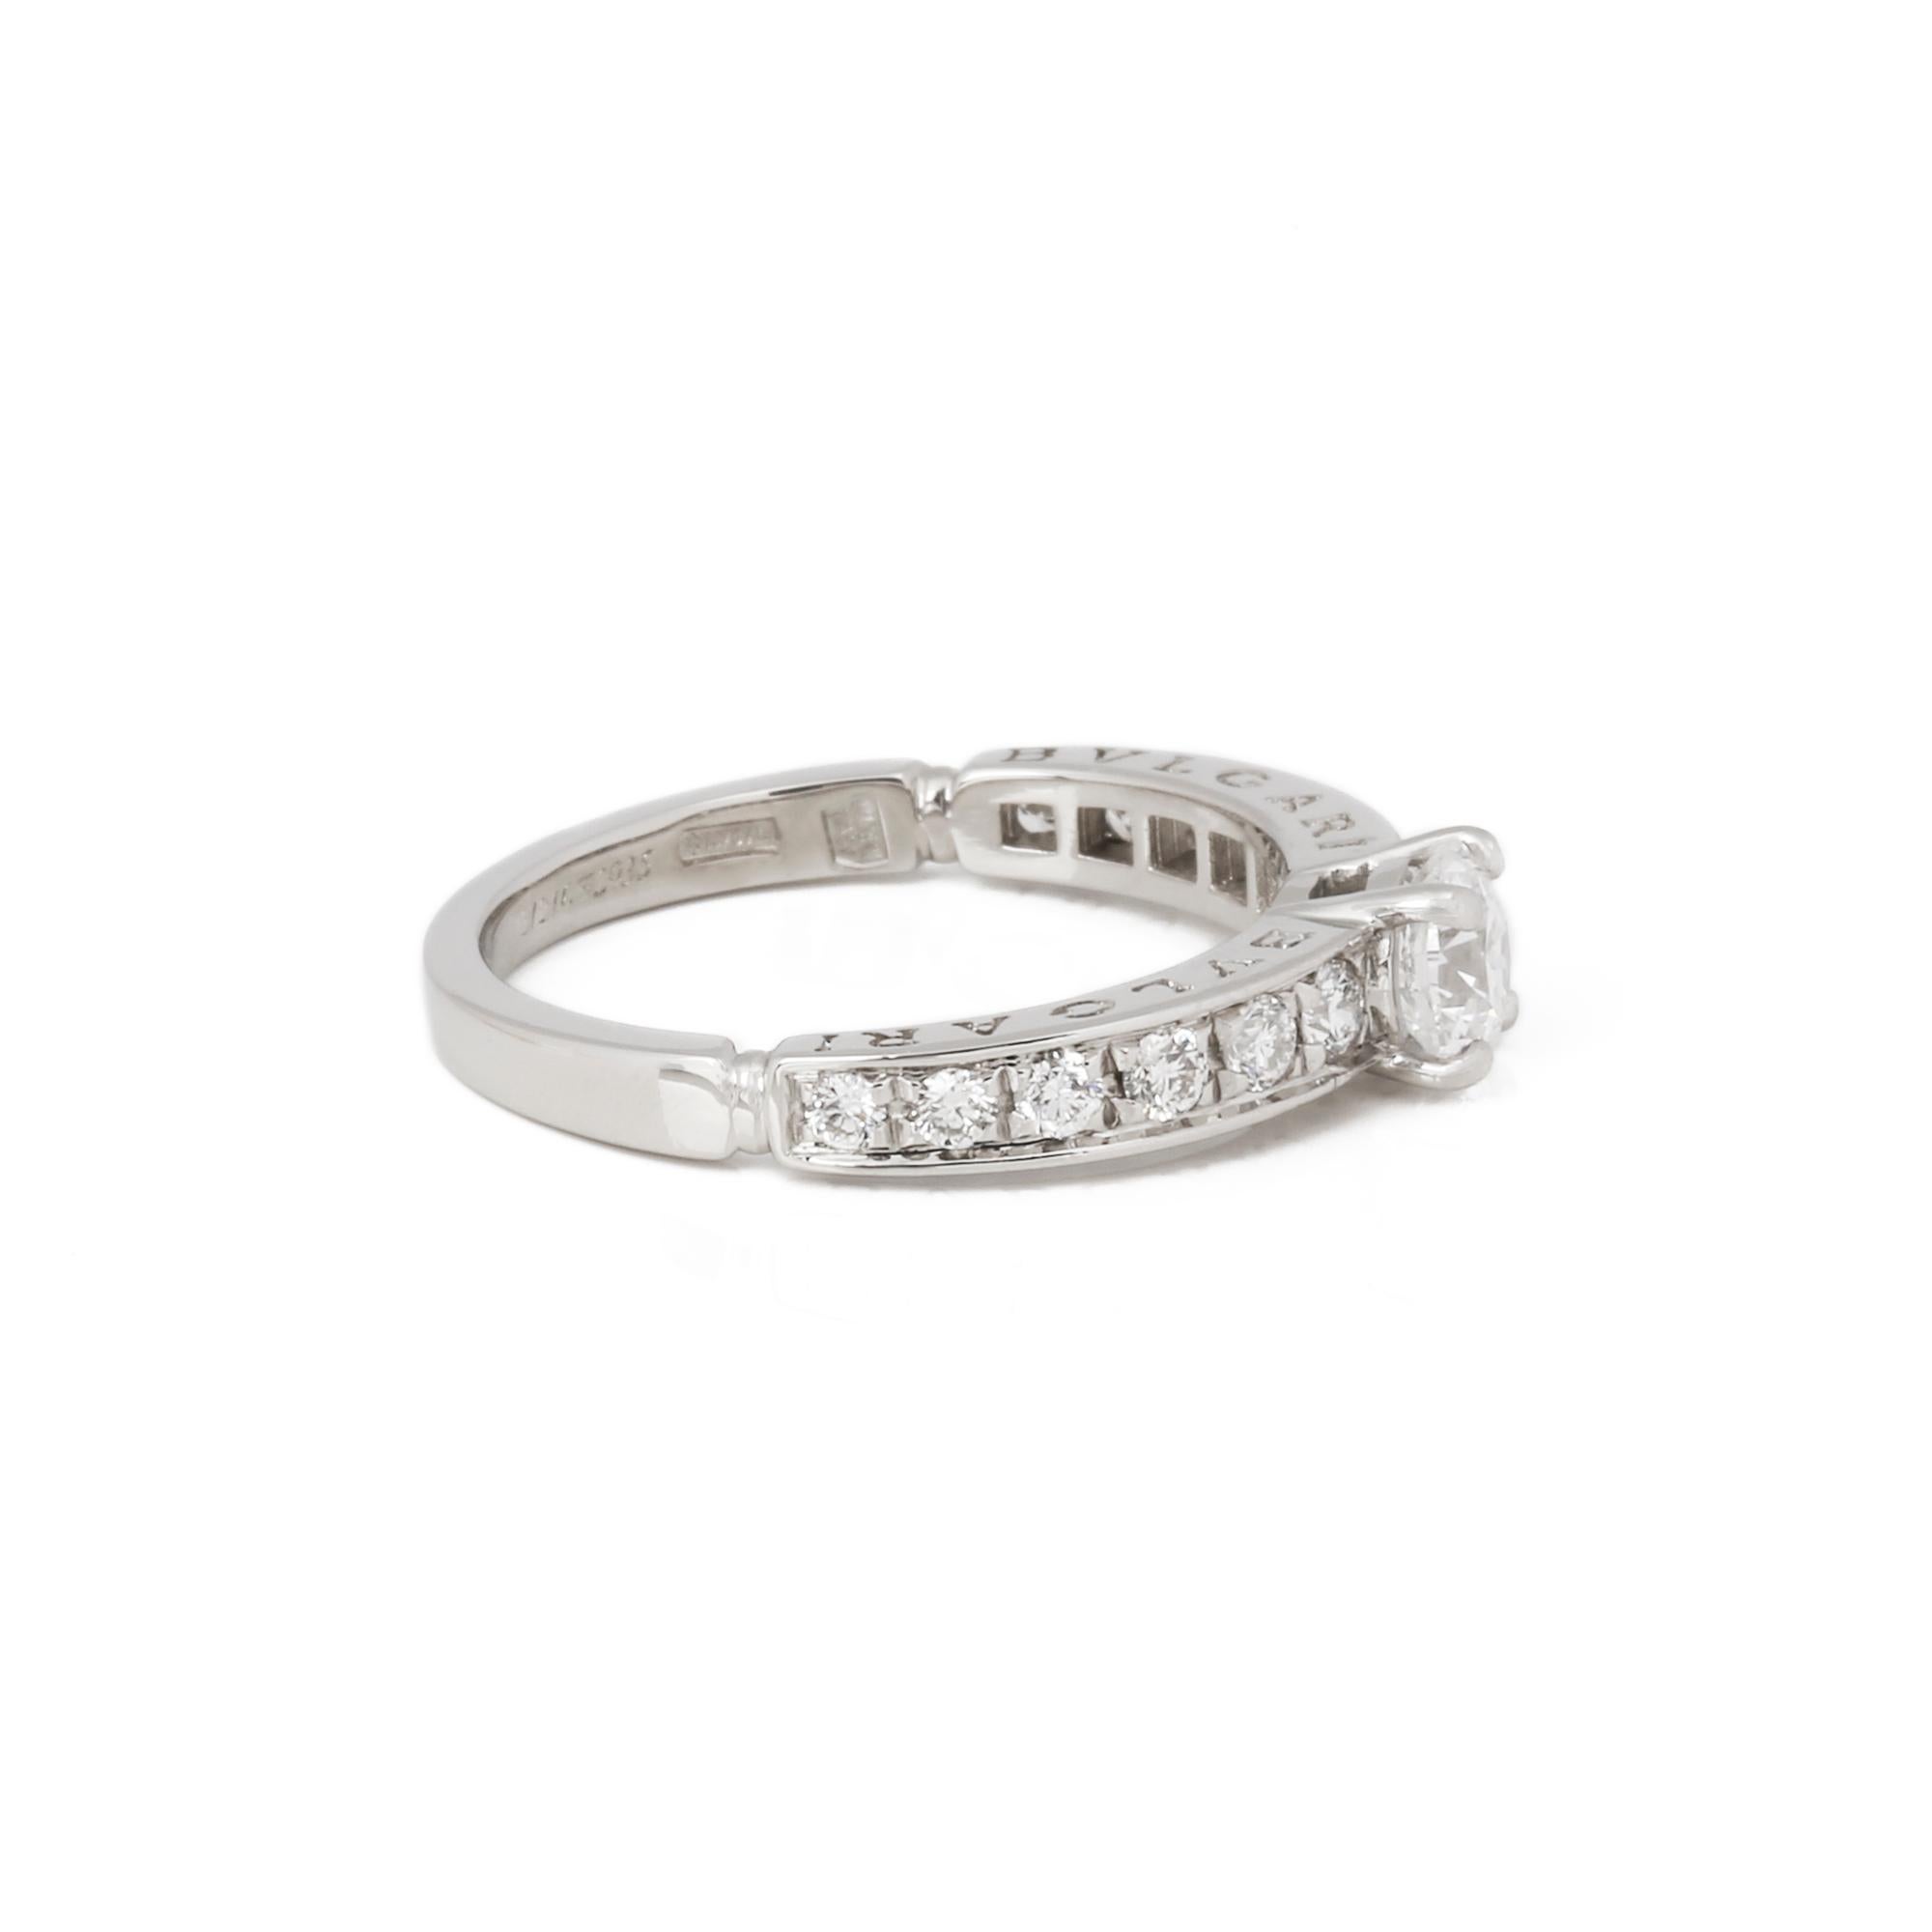 This ring by Bulgari is from the Dedicata a Venezia collection and features a GIA certified 0.5ct diamond complemented by pave set diamonds on the shoulders, mounted in platinum. UK ring size L 1/2. US ring size 52. US ring size 6 1/2. Accompanied